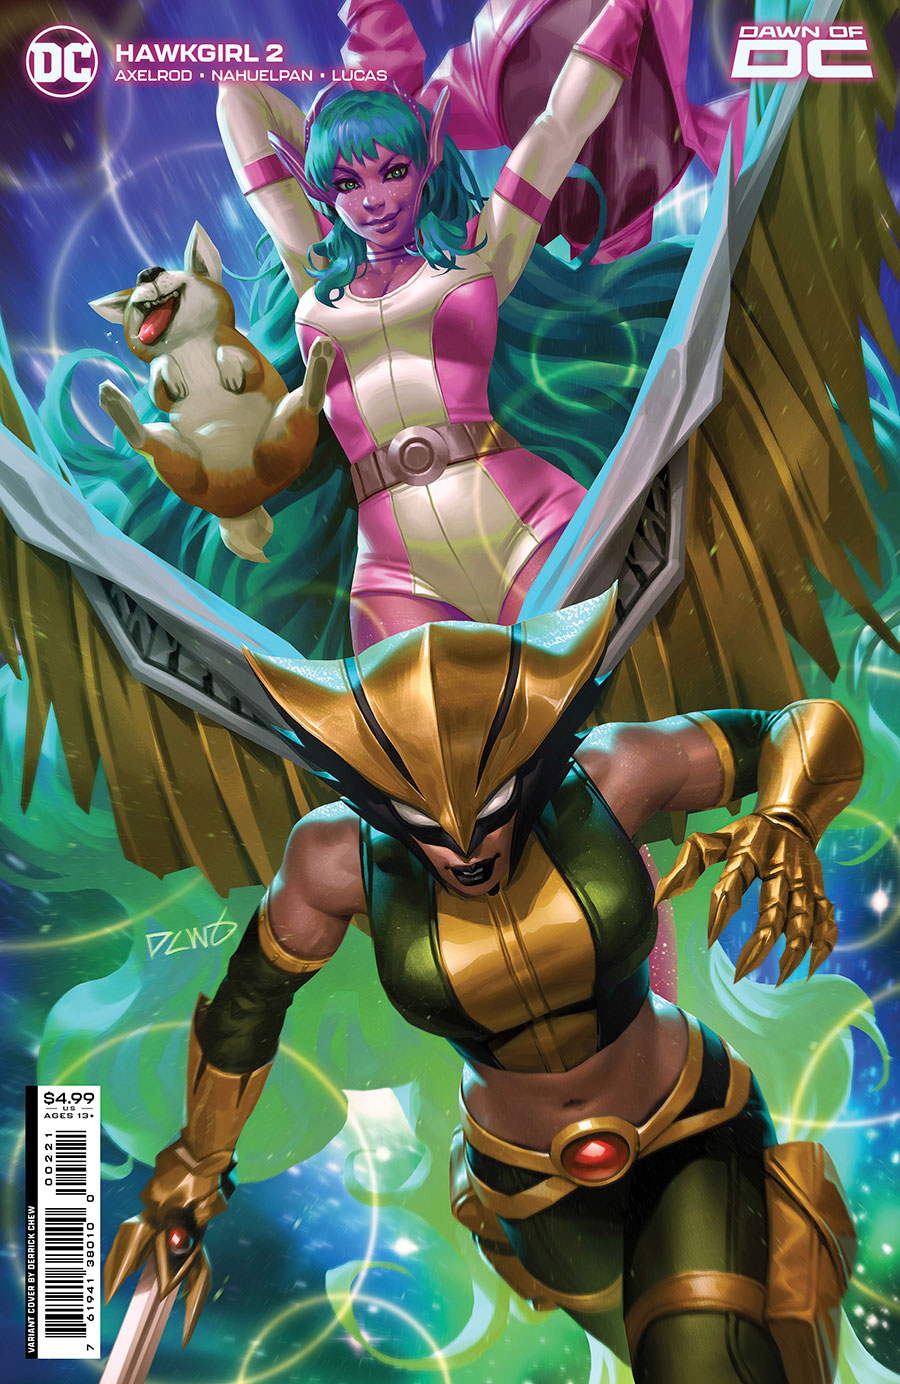 Hawkgirl Vol 2 #2 Cover B Variant Derrick Chew Card Stock Cover